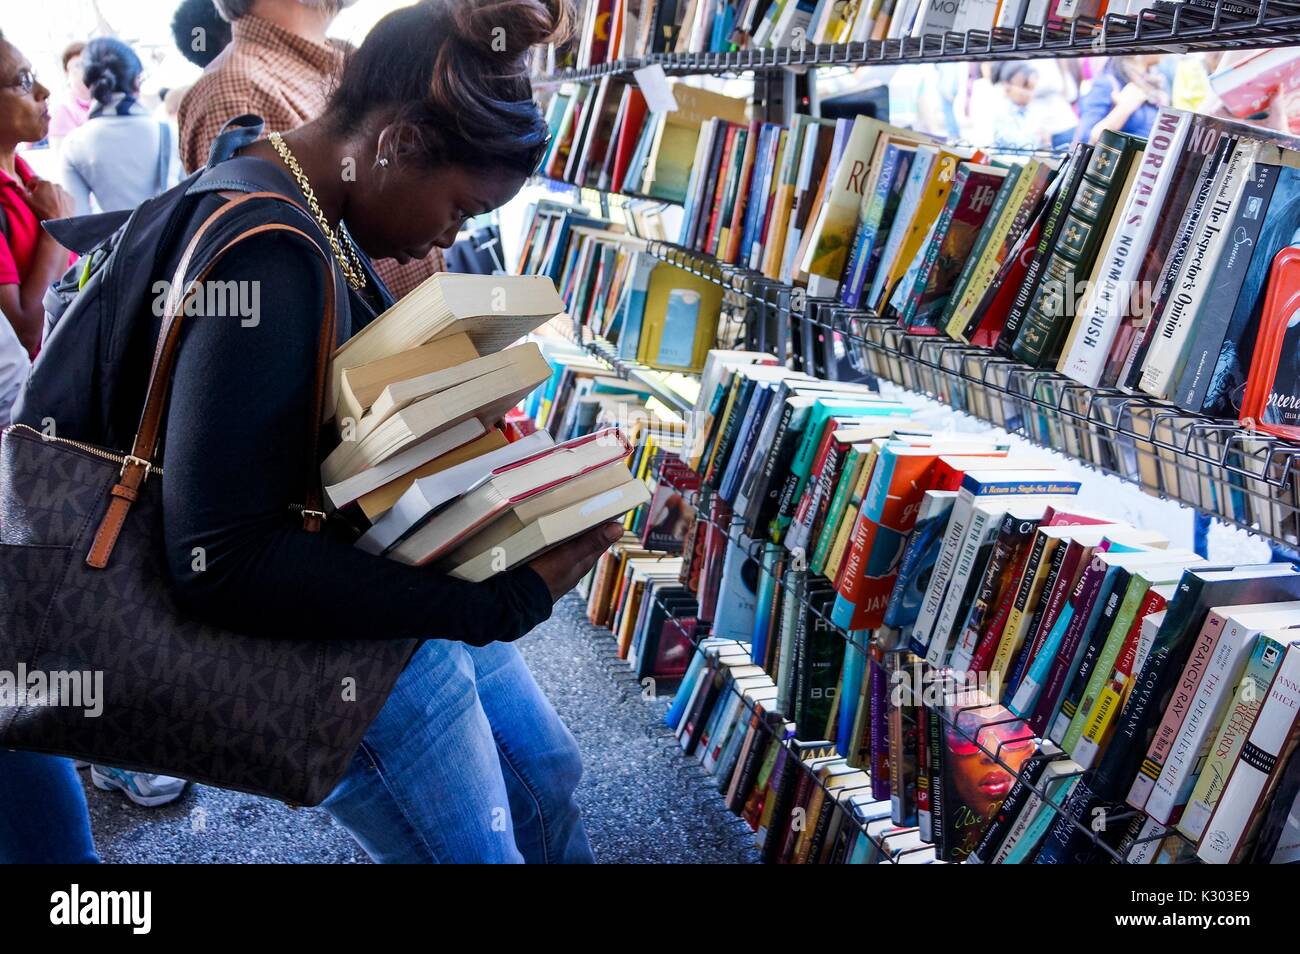 A young woman struggles to hold a leaning pile of books in her arms as she observes titles of used books on a shelf during Baltimore Book Festival, Baltimore, Maryland, 2013. Courtesy Eric Chen. Stock Photo